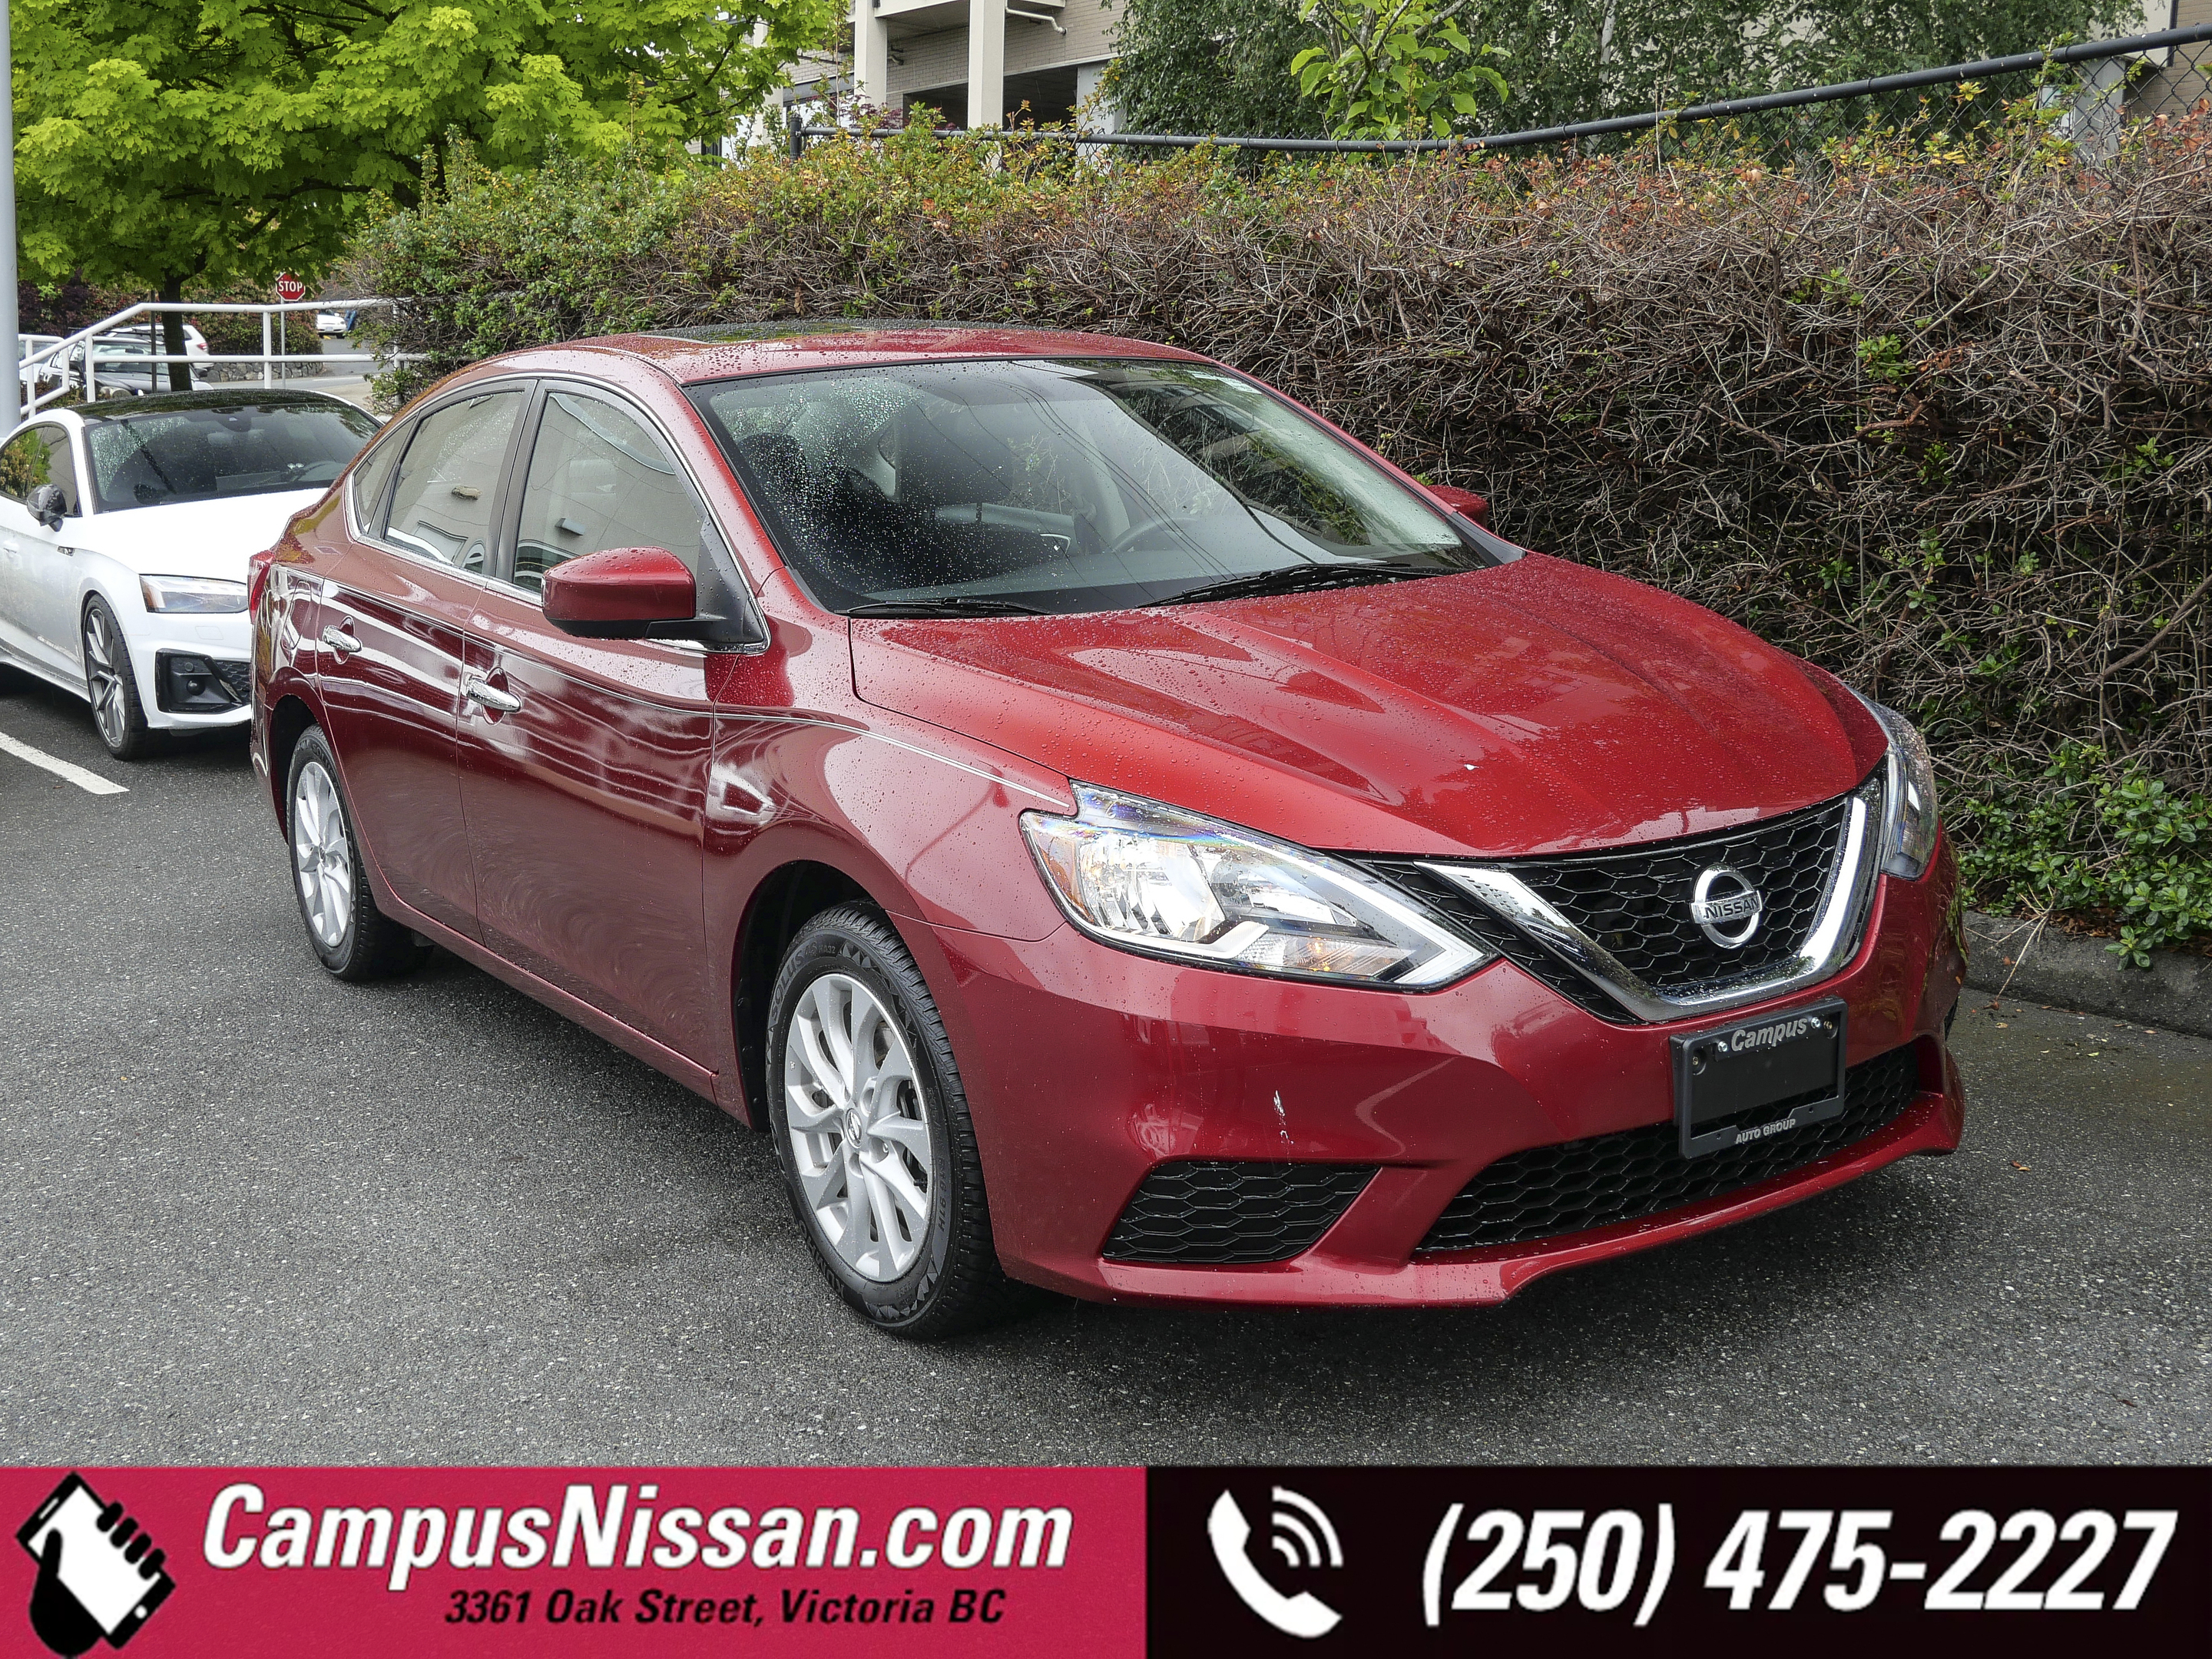 2017 Nissan Sentra SV | Campus Serviced | Locally Driven | 